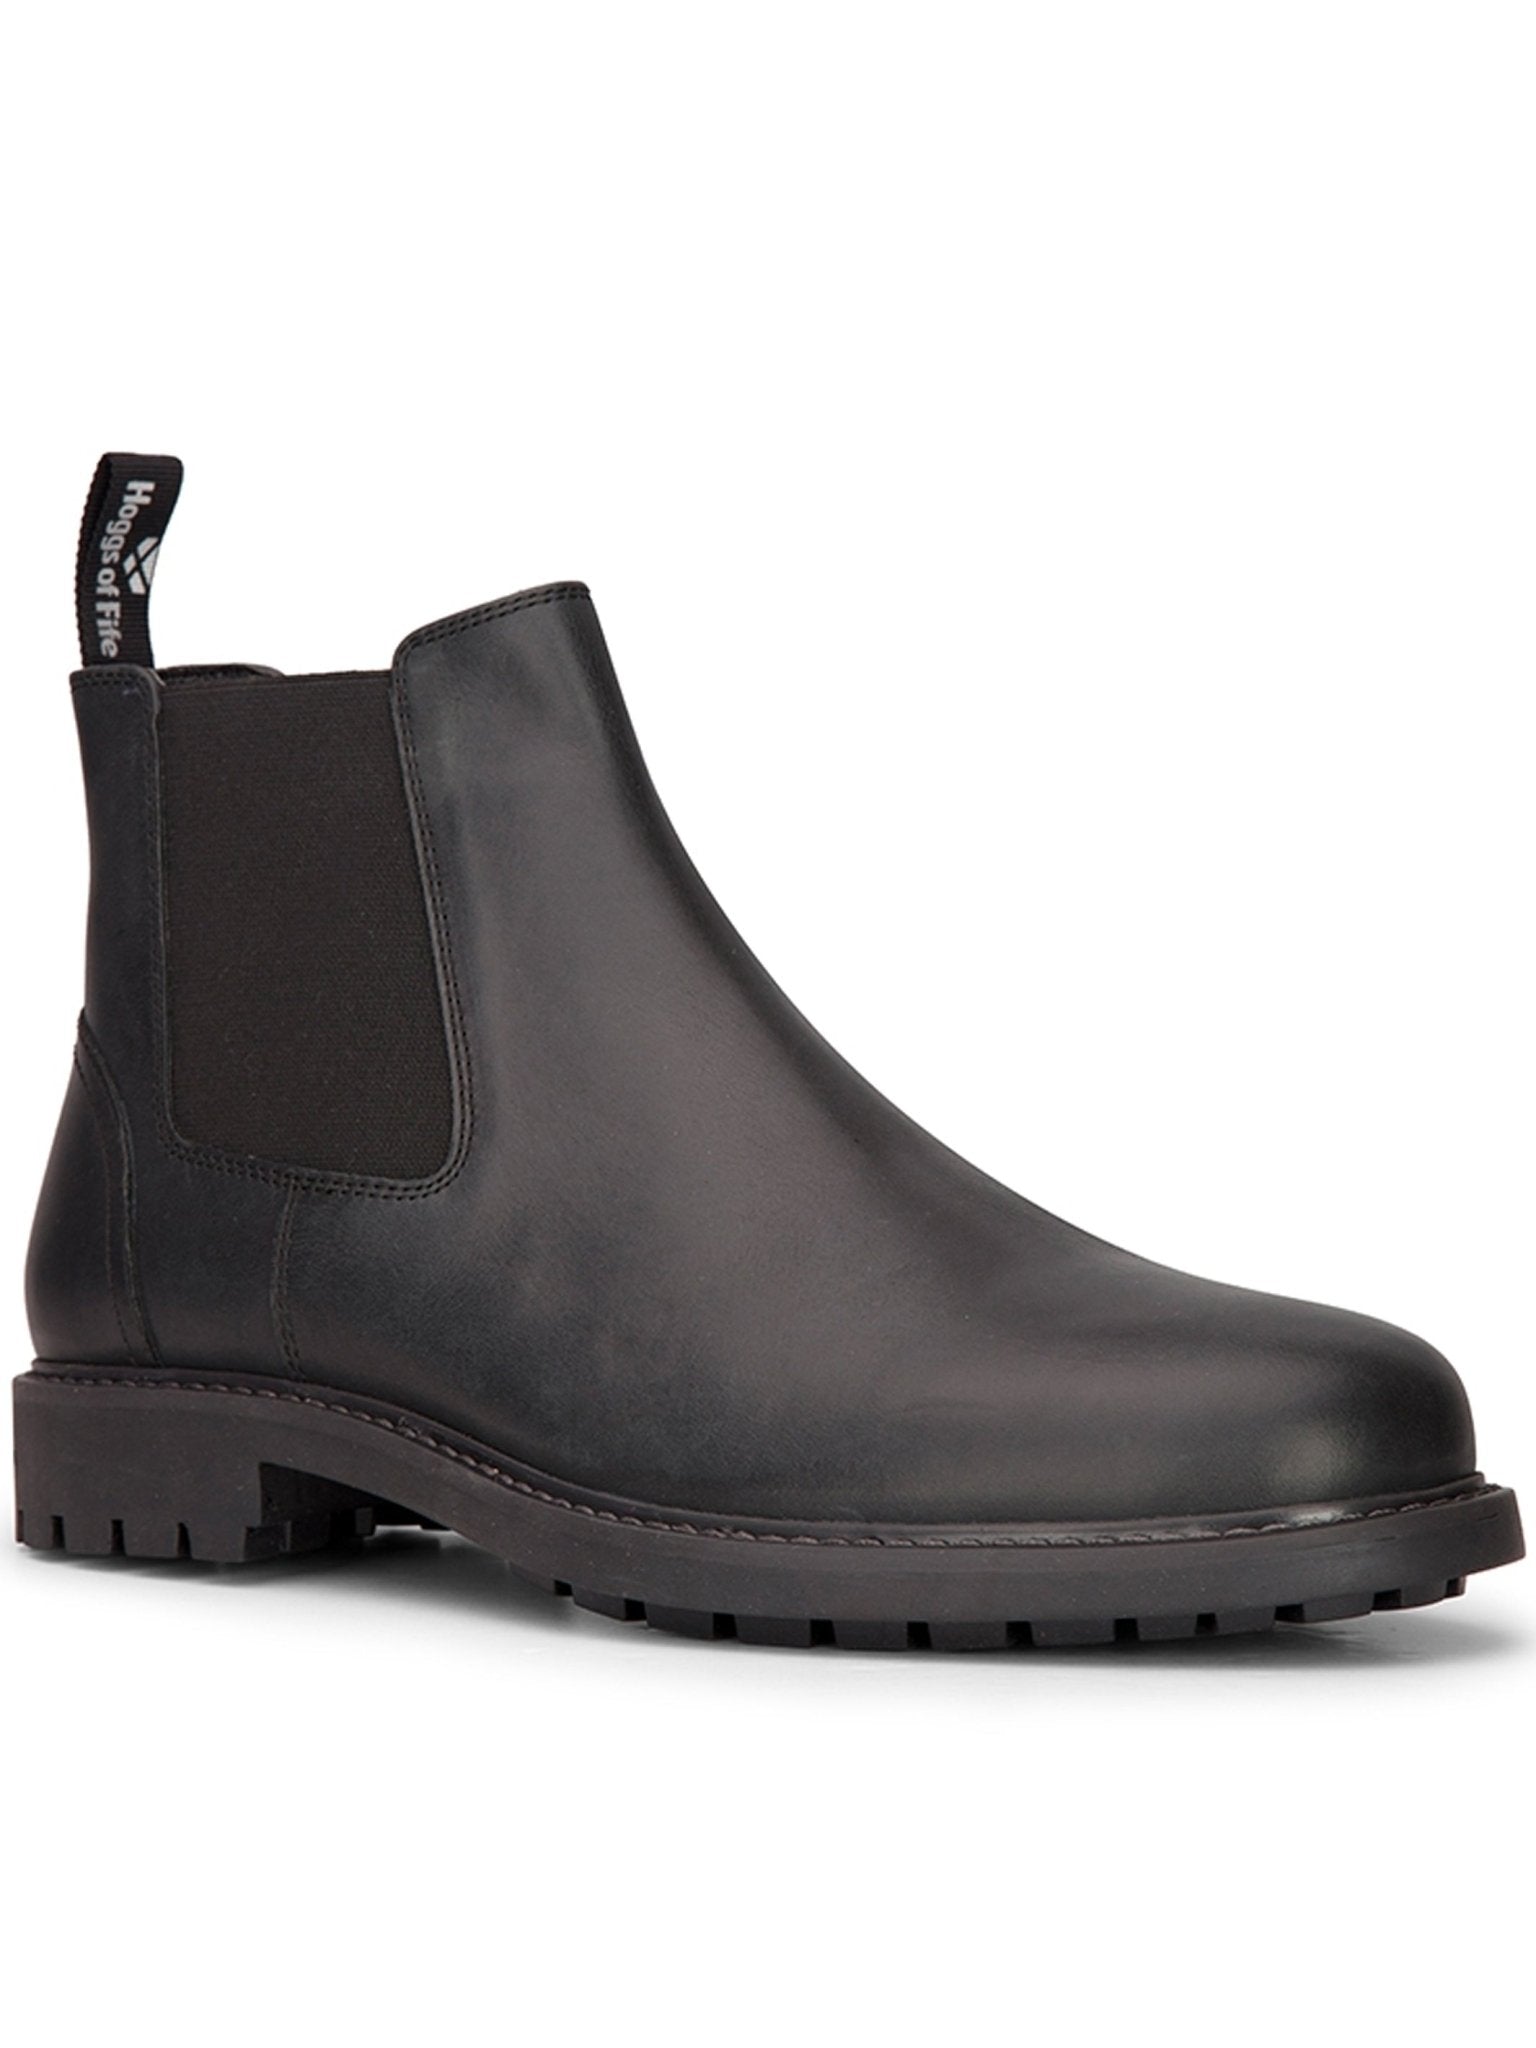 4elementsclothingHoggs of FifeHoggs of Fife - Mens Chelsea Boot / Dealer Boot - Banff Country ClassicBoots4232/BK/40